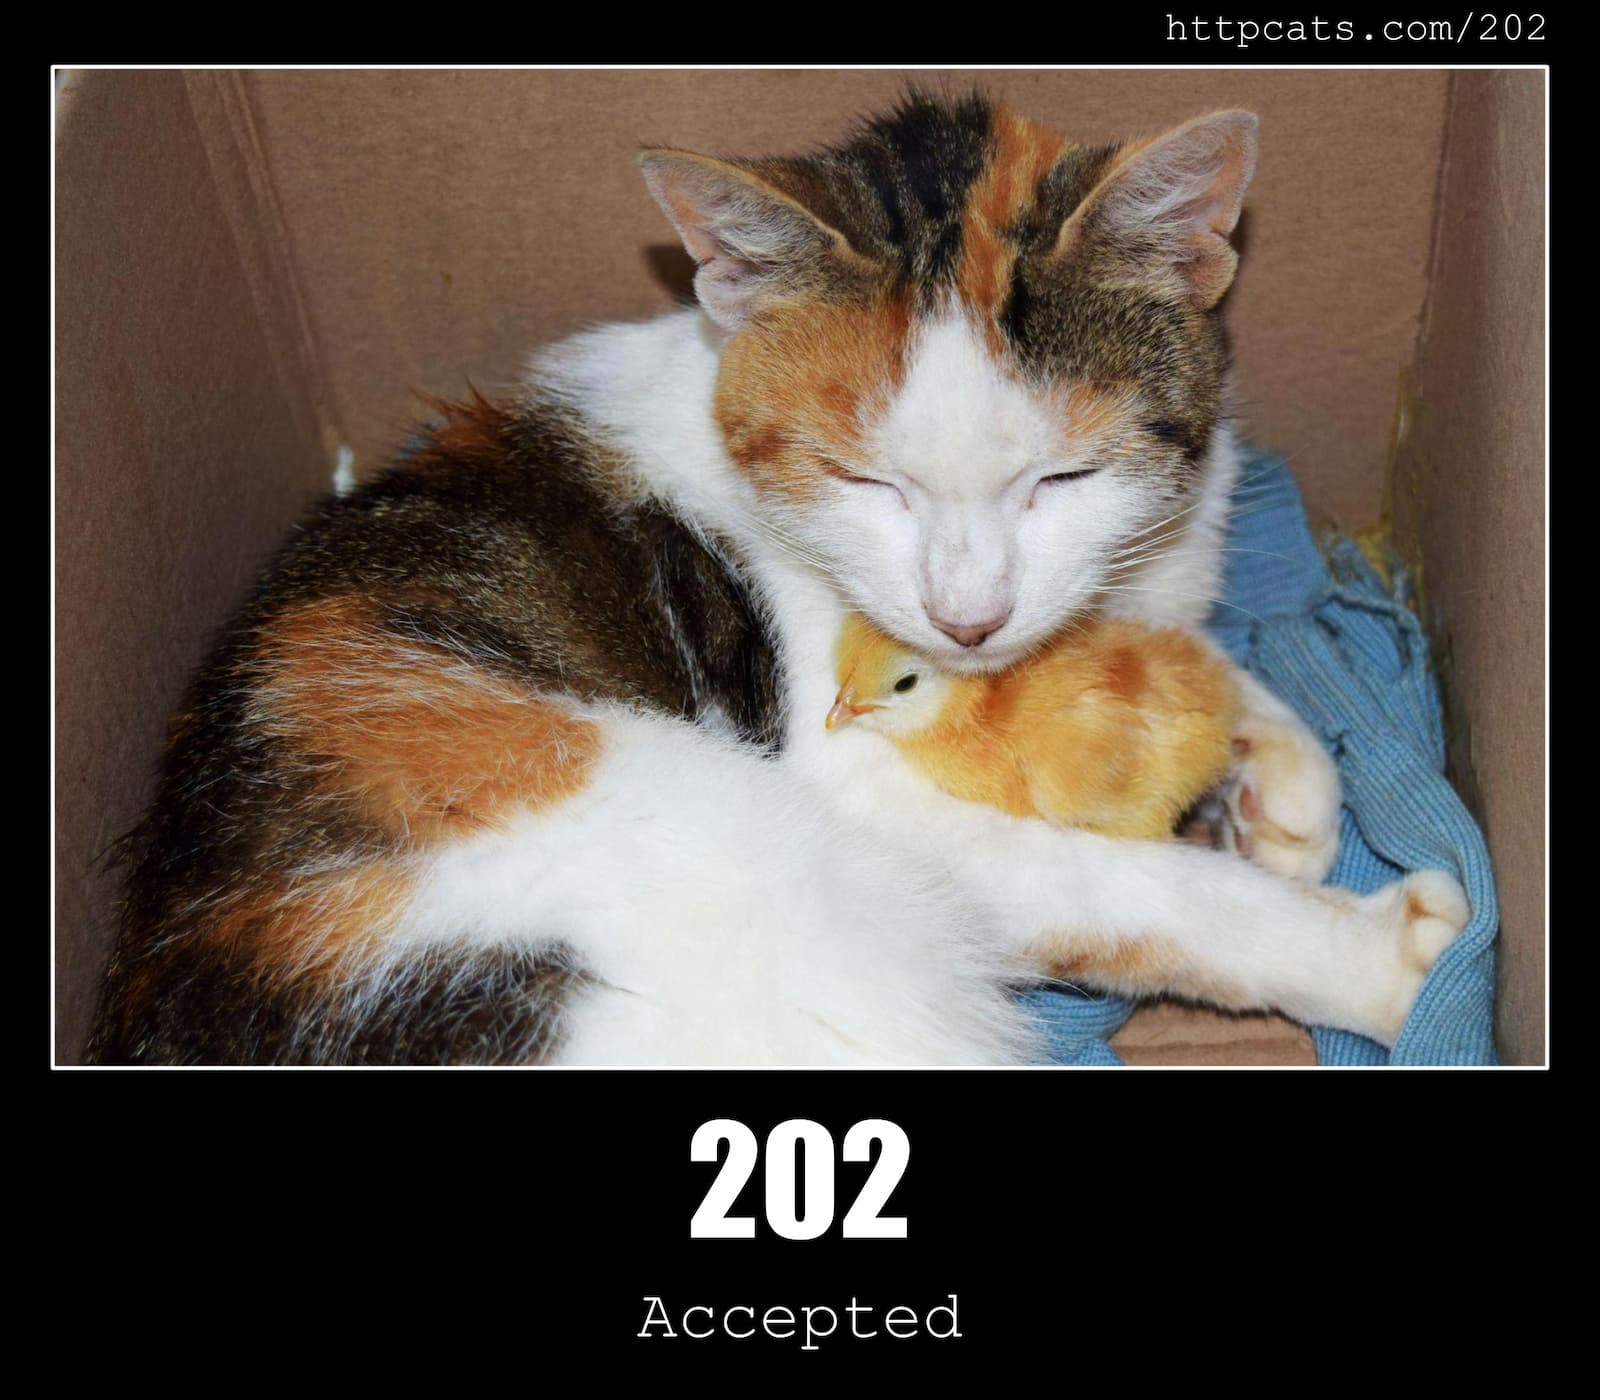 HTTP Status Code 202 Accepted & Cats